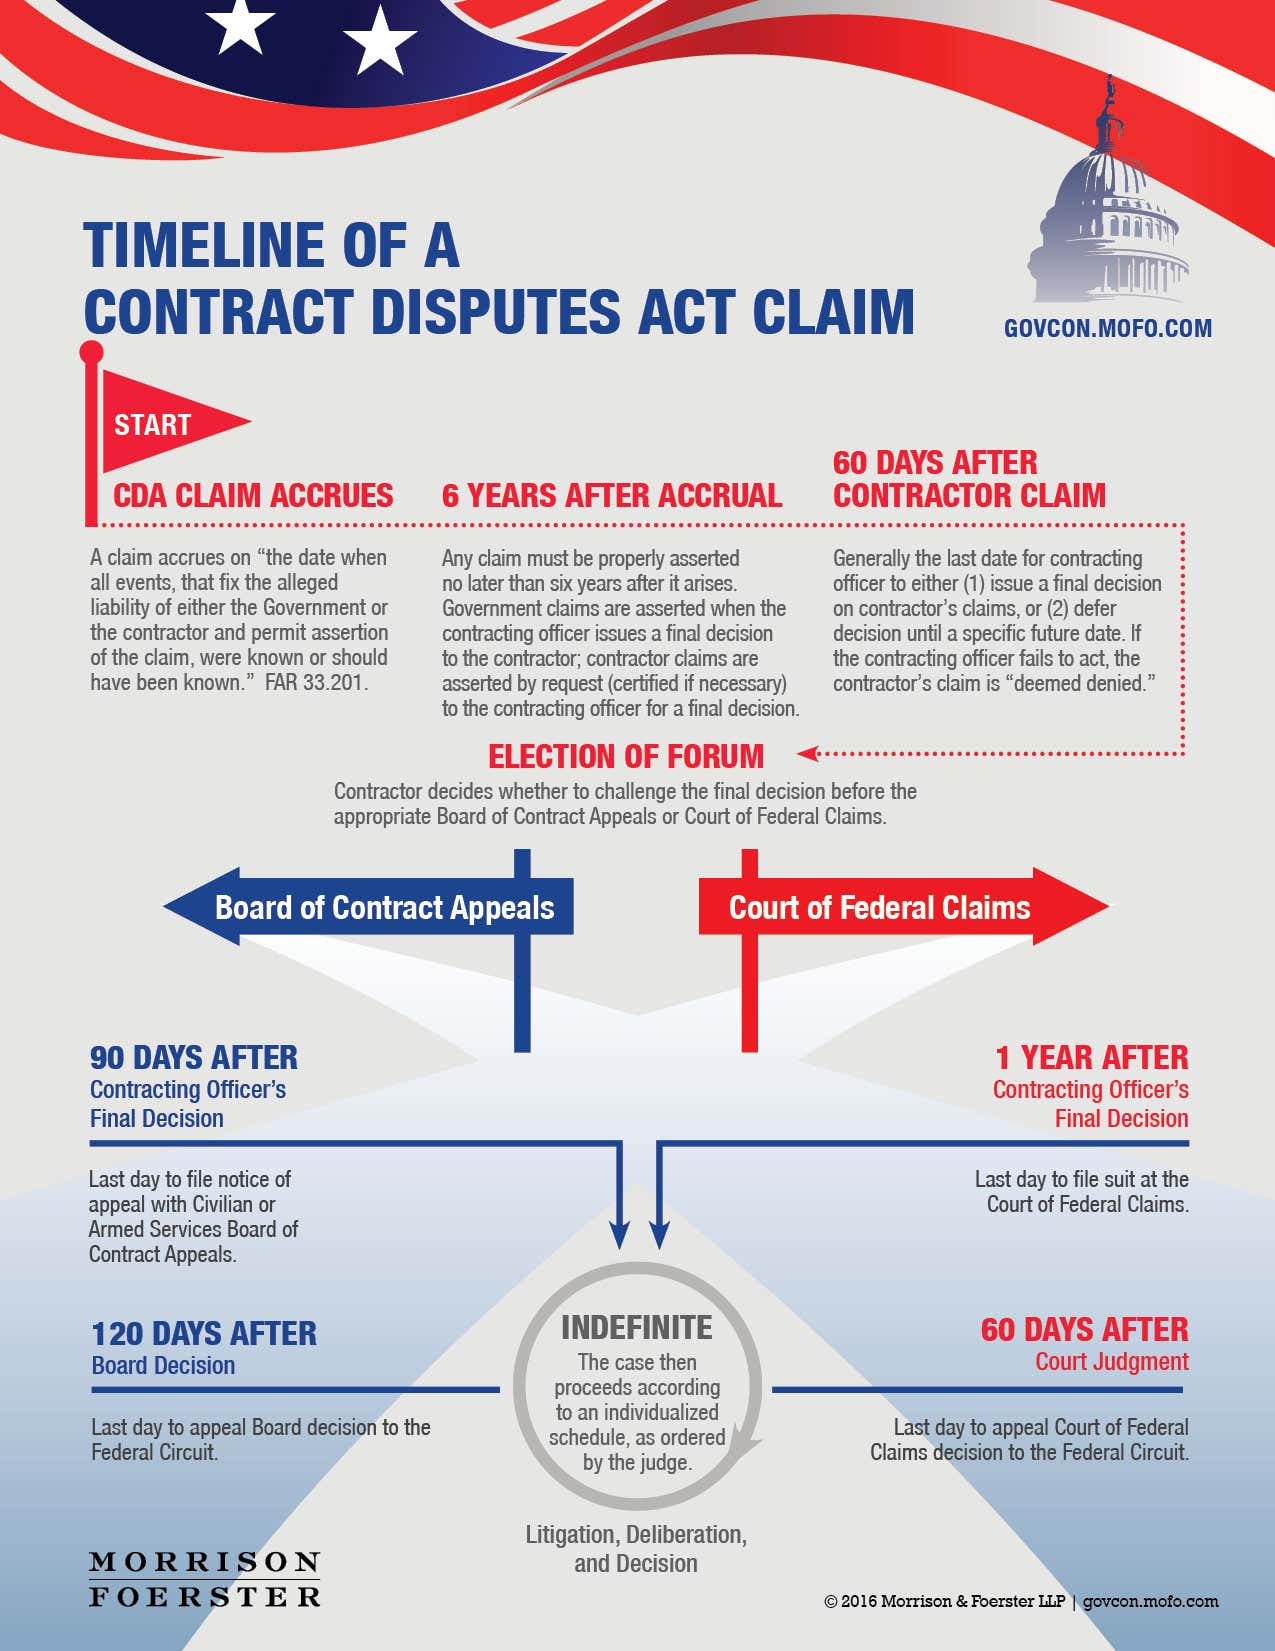 TIMELINE OF A CONTRACT DISPUTES ACT CLAIM